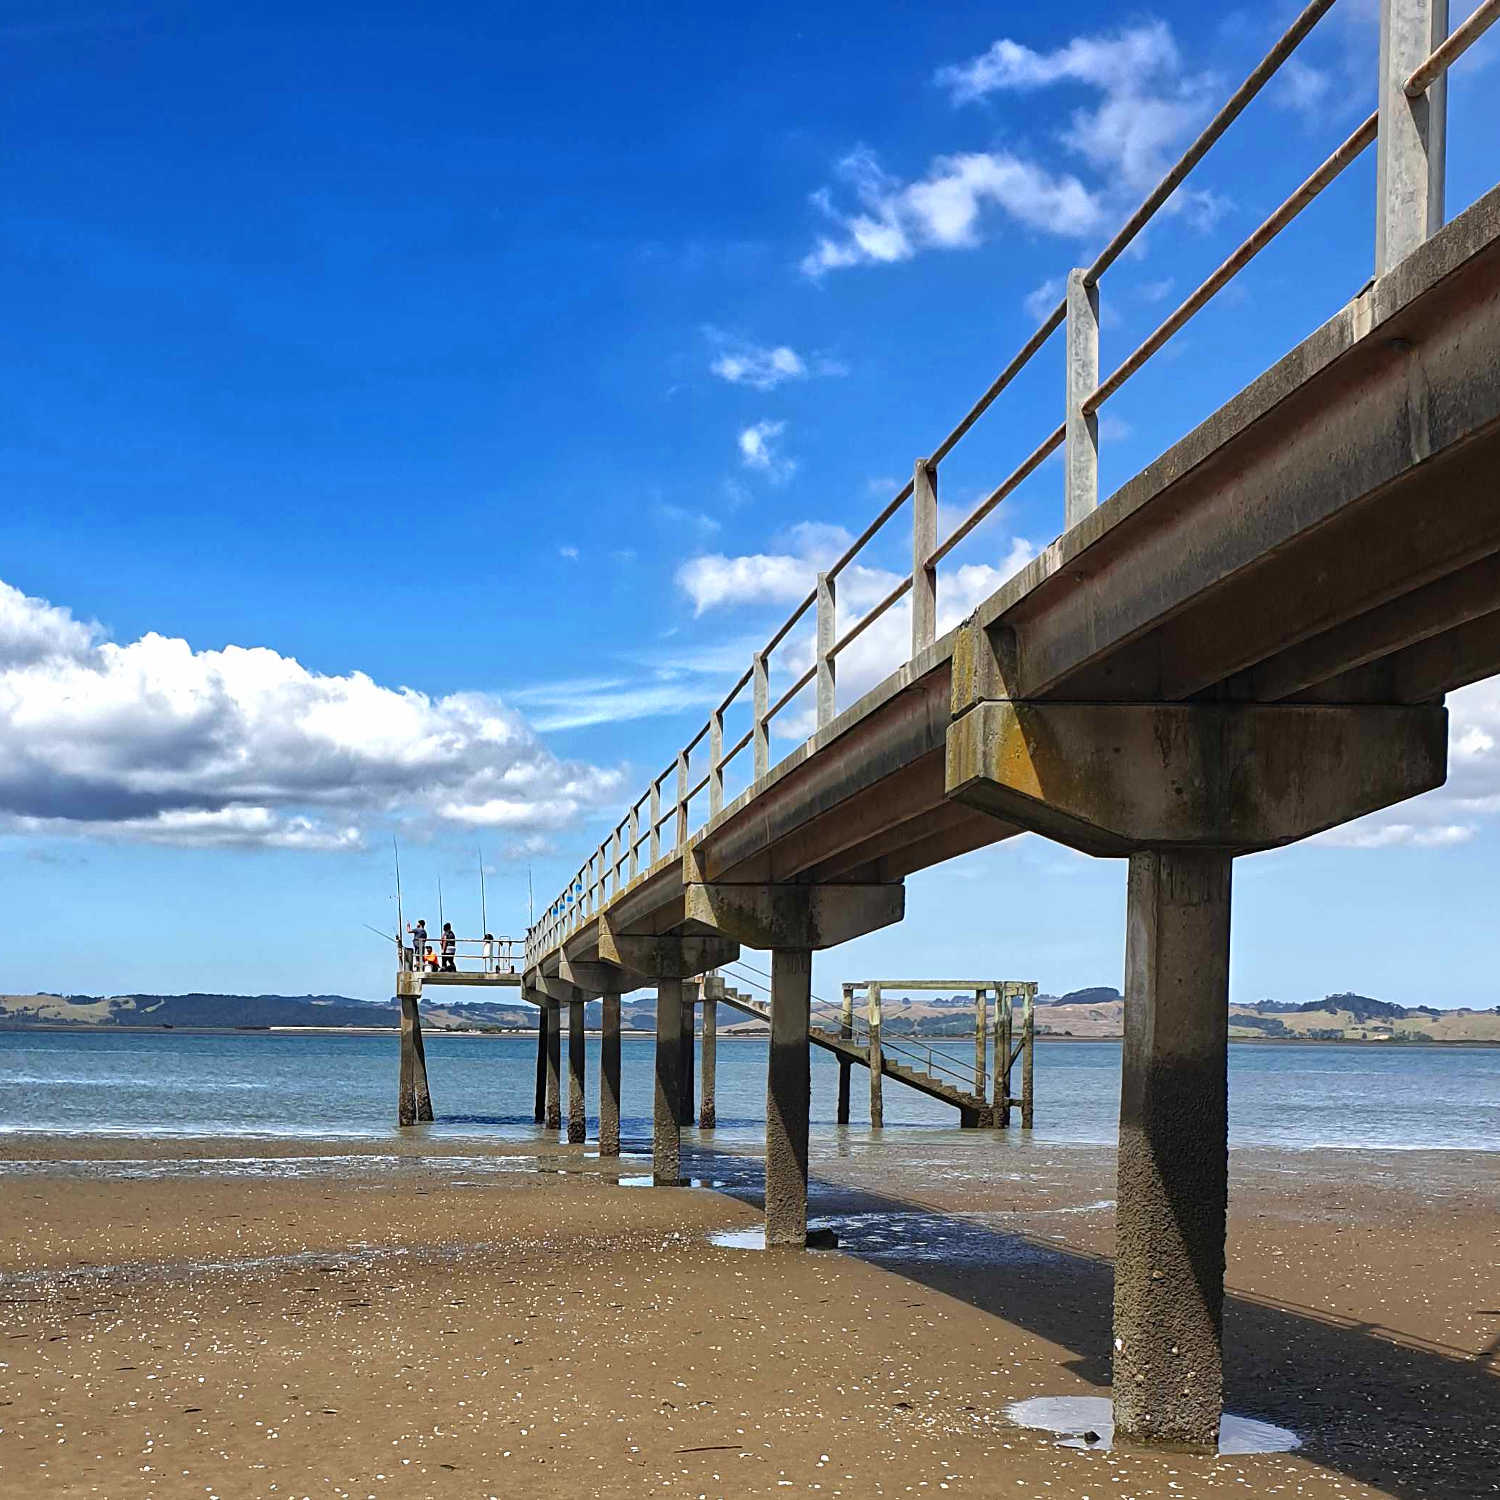 Shelly Bay, Kaipara Harbour, jetty at low tide, note high tide mark, New Zealand